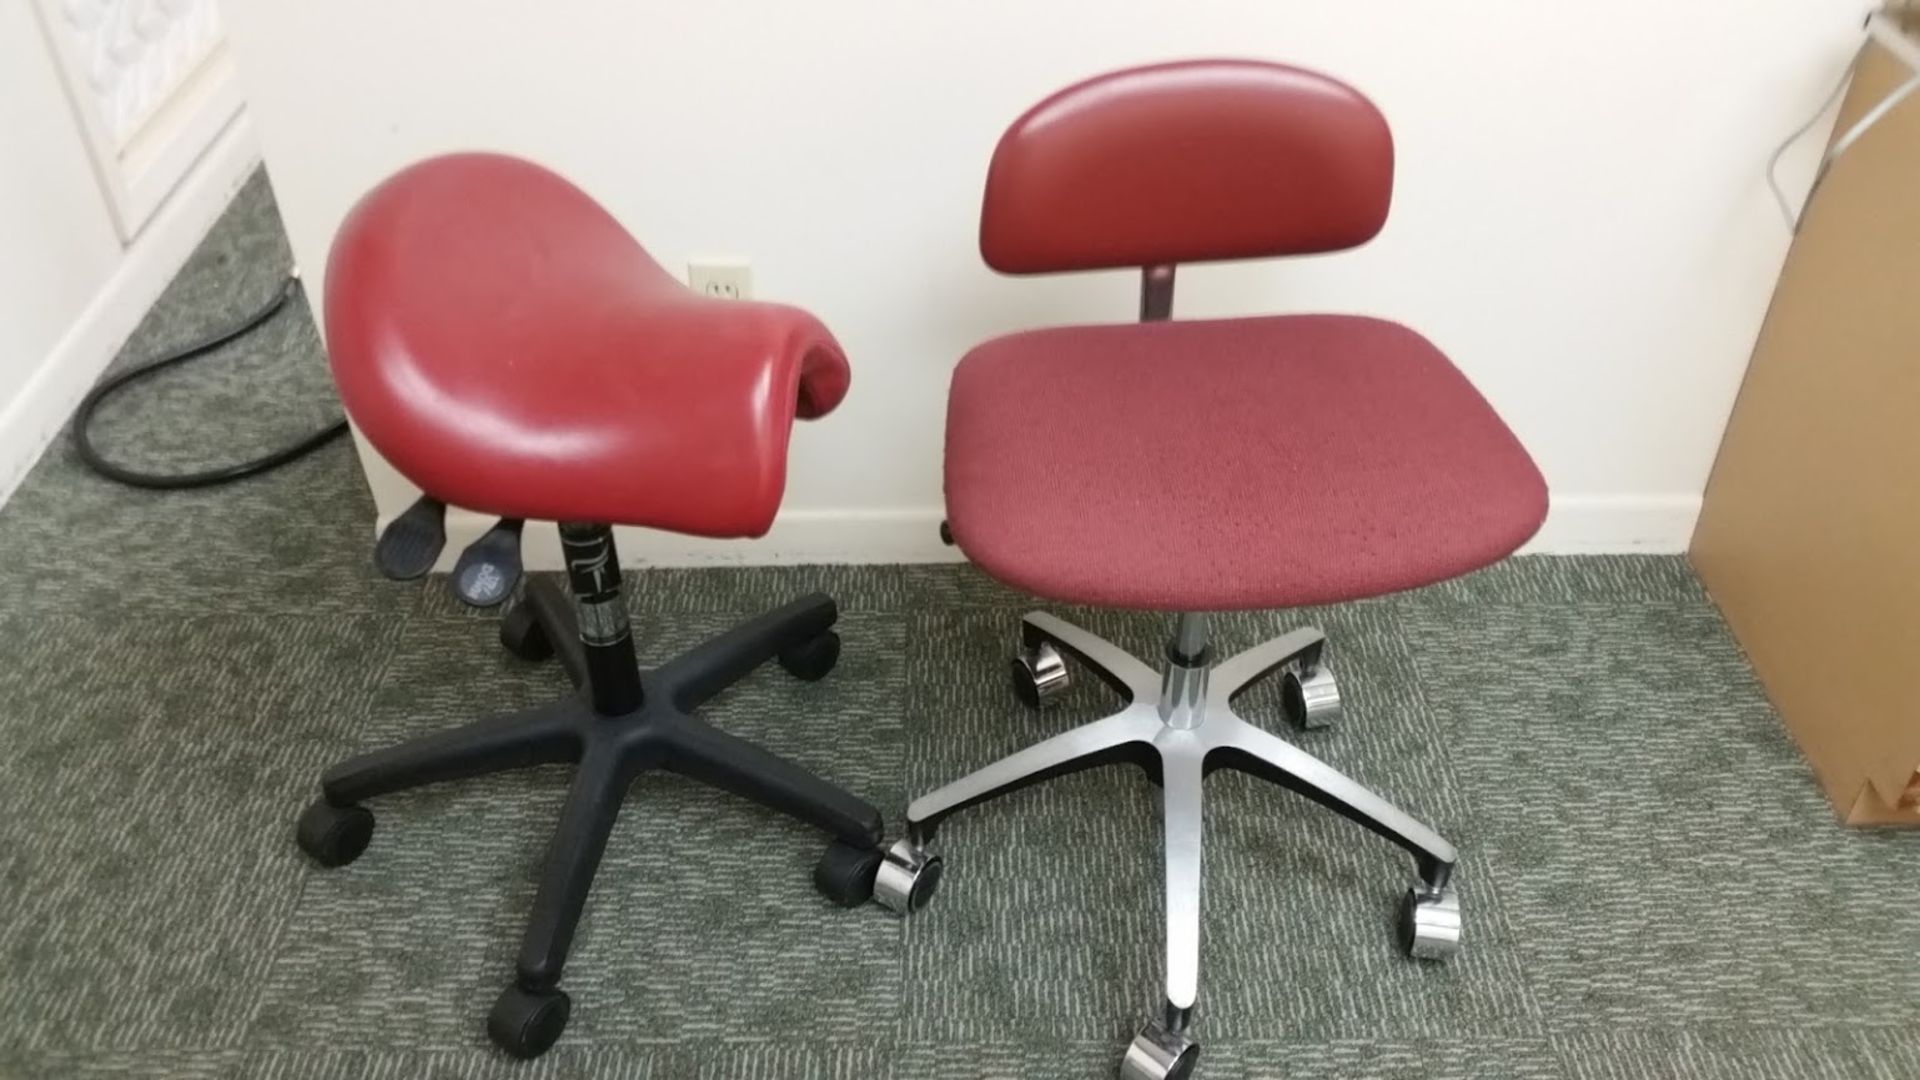 Lot consisting of 2 dental assistant chairs on casters.